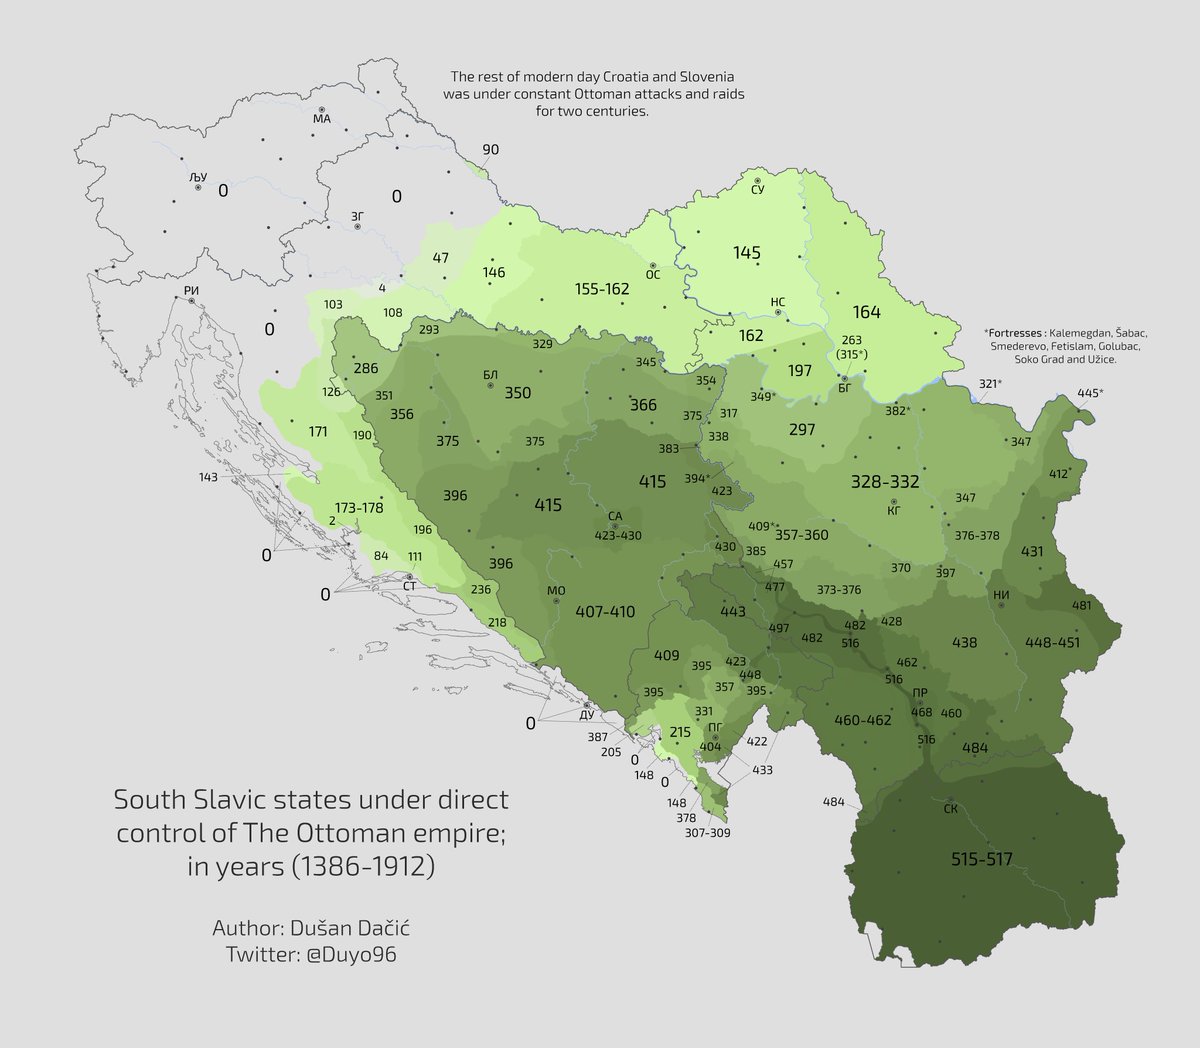 10. Here's a similar map focused on the formation of the Kingdom of SHS/ #Yugoslavia to be by the same  @Duyo96, accompanied w/ his excellent new map displaying the duration of the  #Ottoman occupation in the region & a map of its consequences: the illiteracy in  #Yugoslavia in 1931.